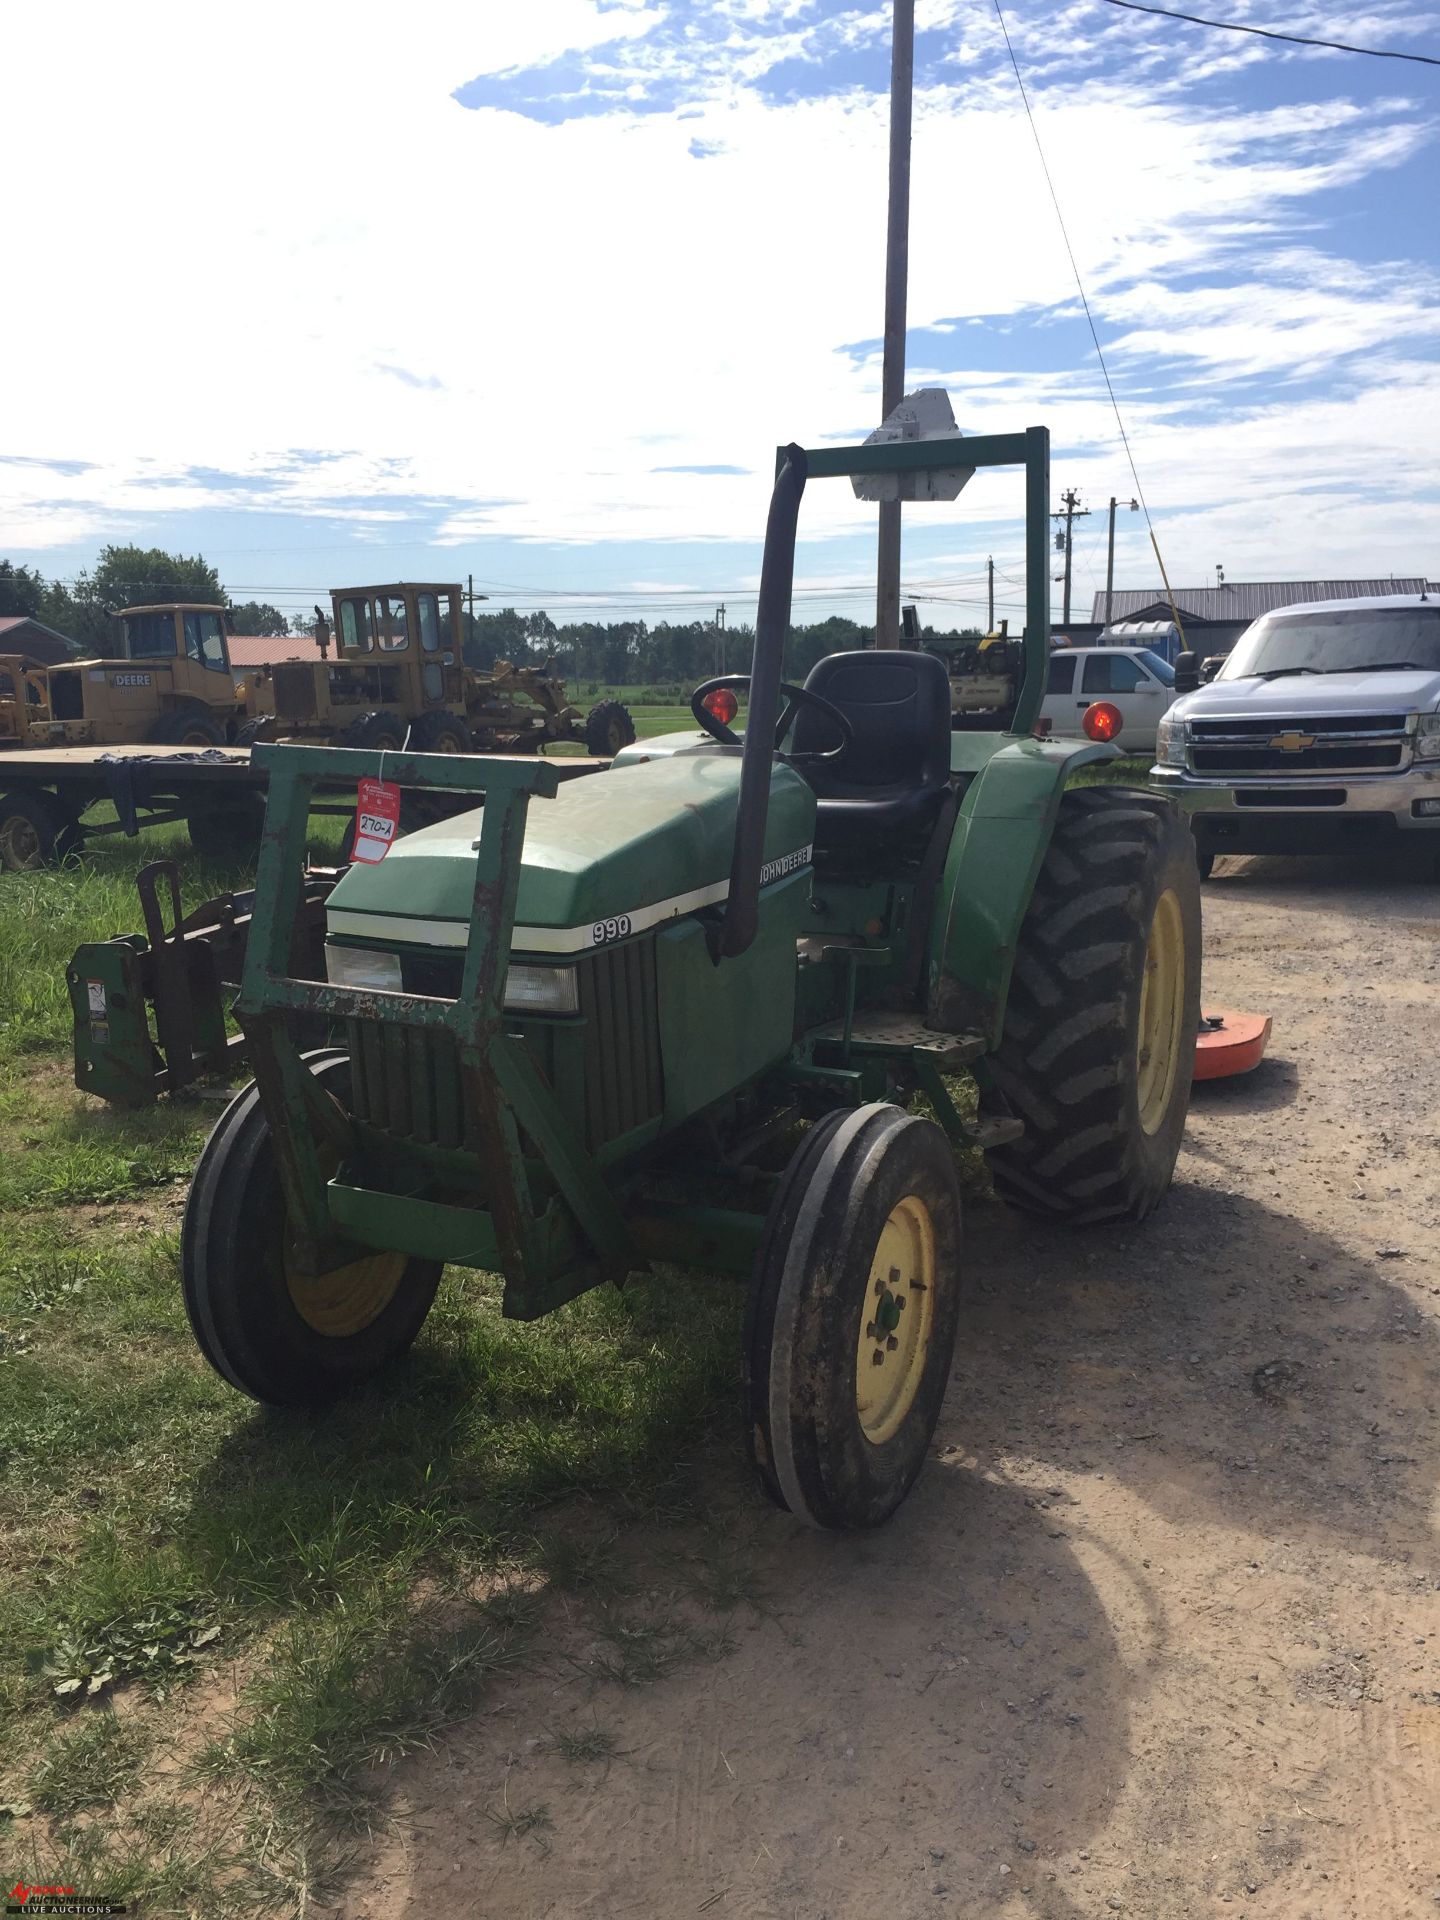 2001 JOHN DEERE 990 TRACTOR, 3PT, PTO, 14.9-24 REAR TIRES, 5124 HOURS SHOWING (HOURS SUBJECT TO